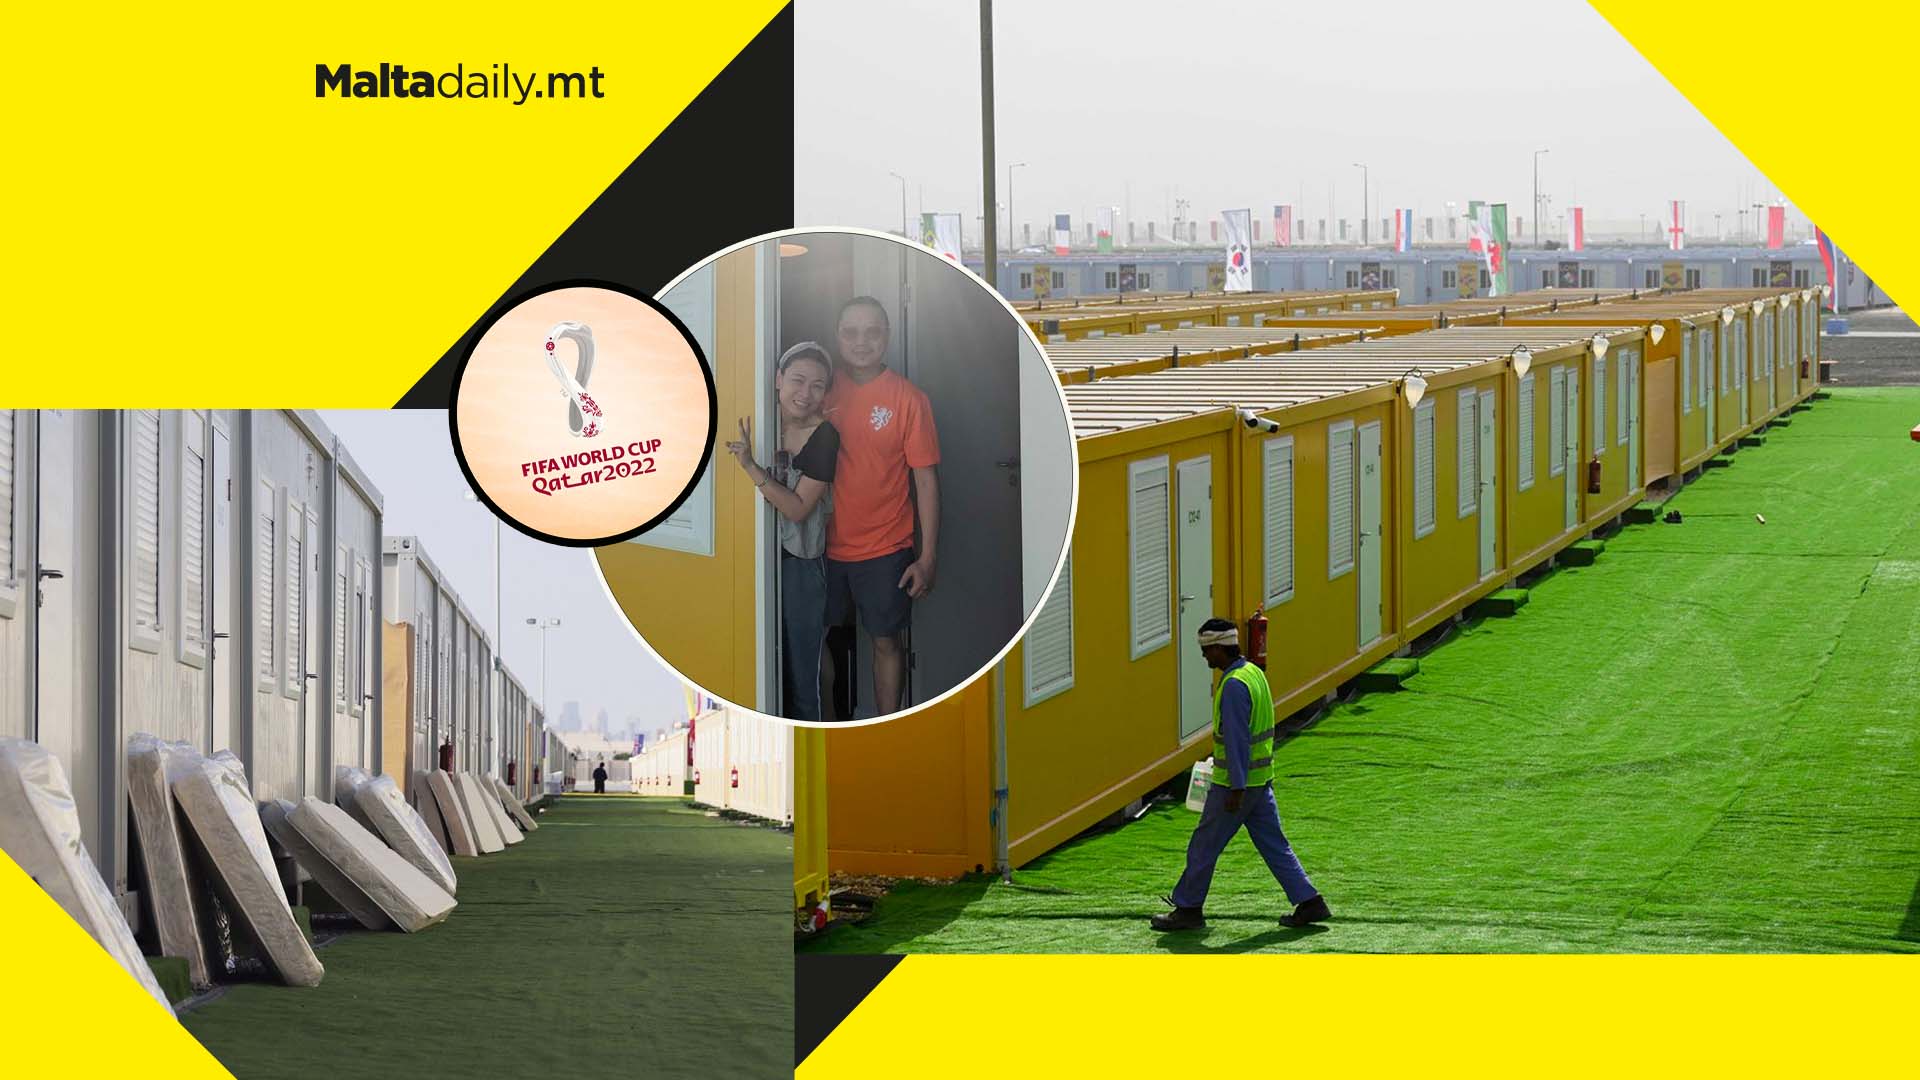 World Cup fans housed in shipping containers in middle of desert